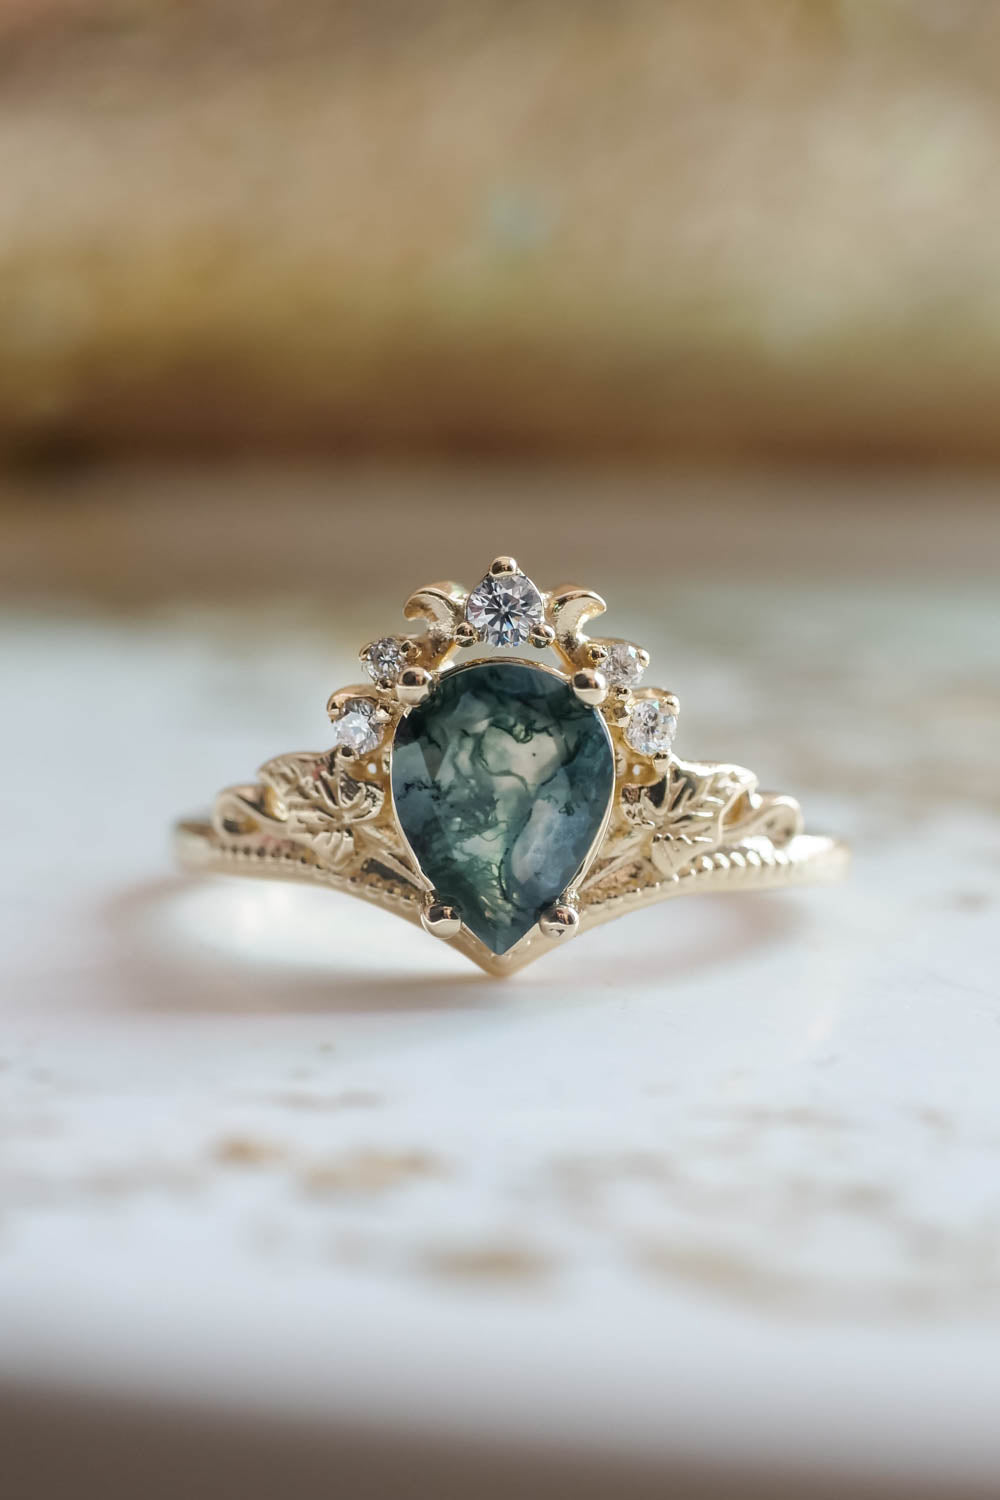 Moss agate proposal ring, non-trivial green stone engagement ring / Ariadne - Eden Garden Jewelry™